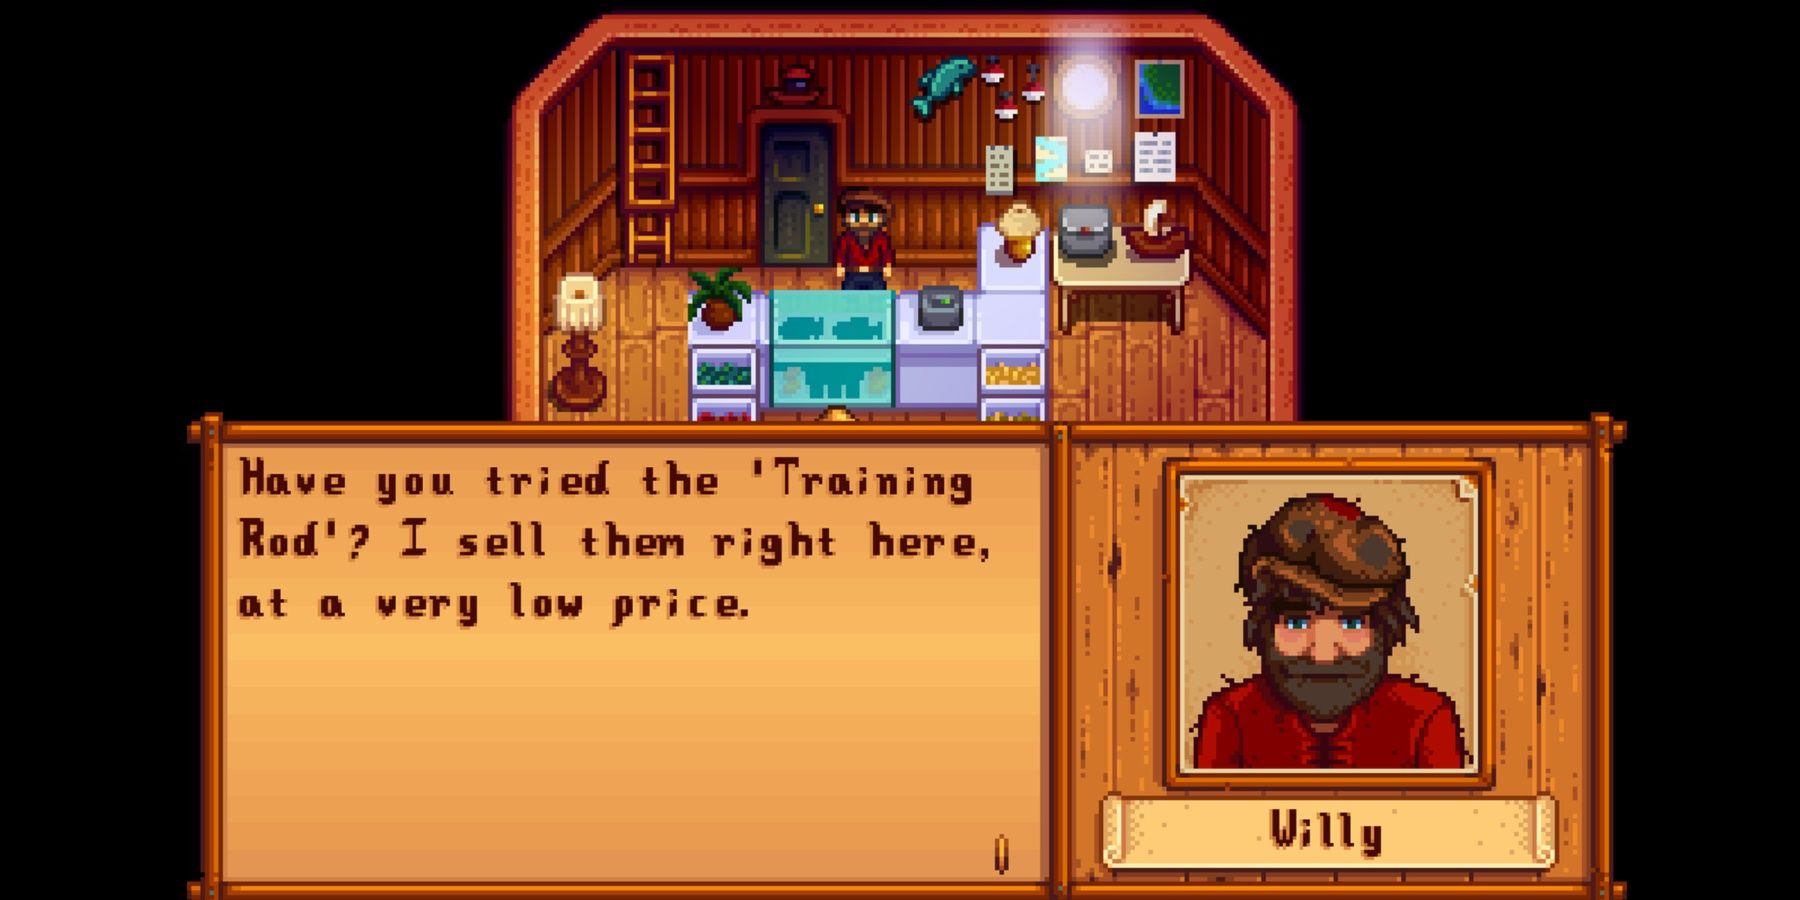 willy suggests that the player buys a training rod